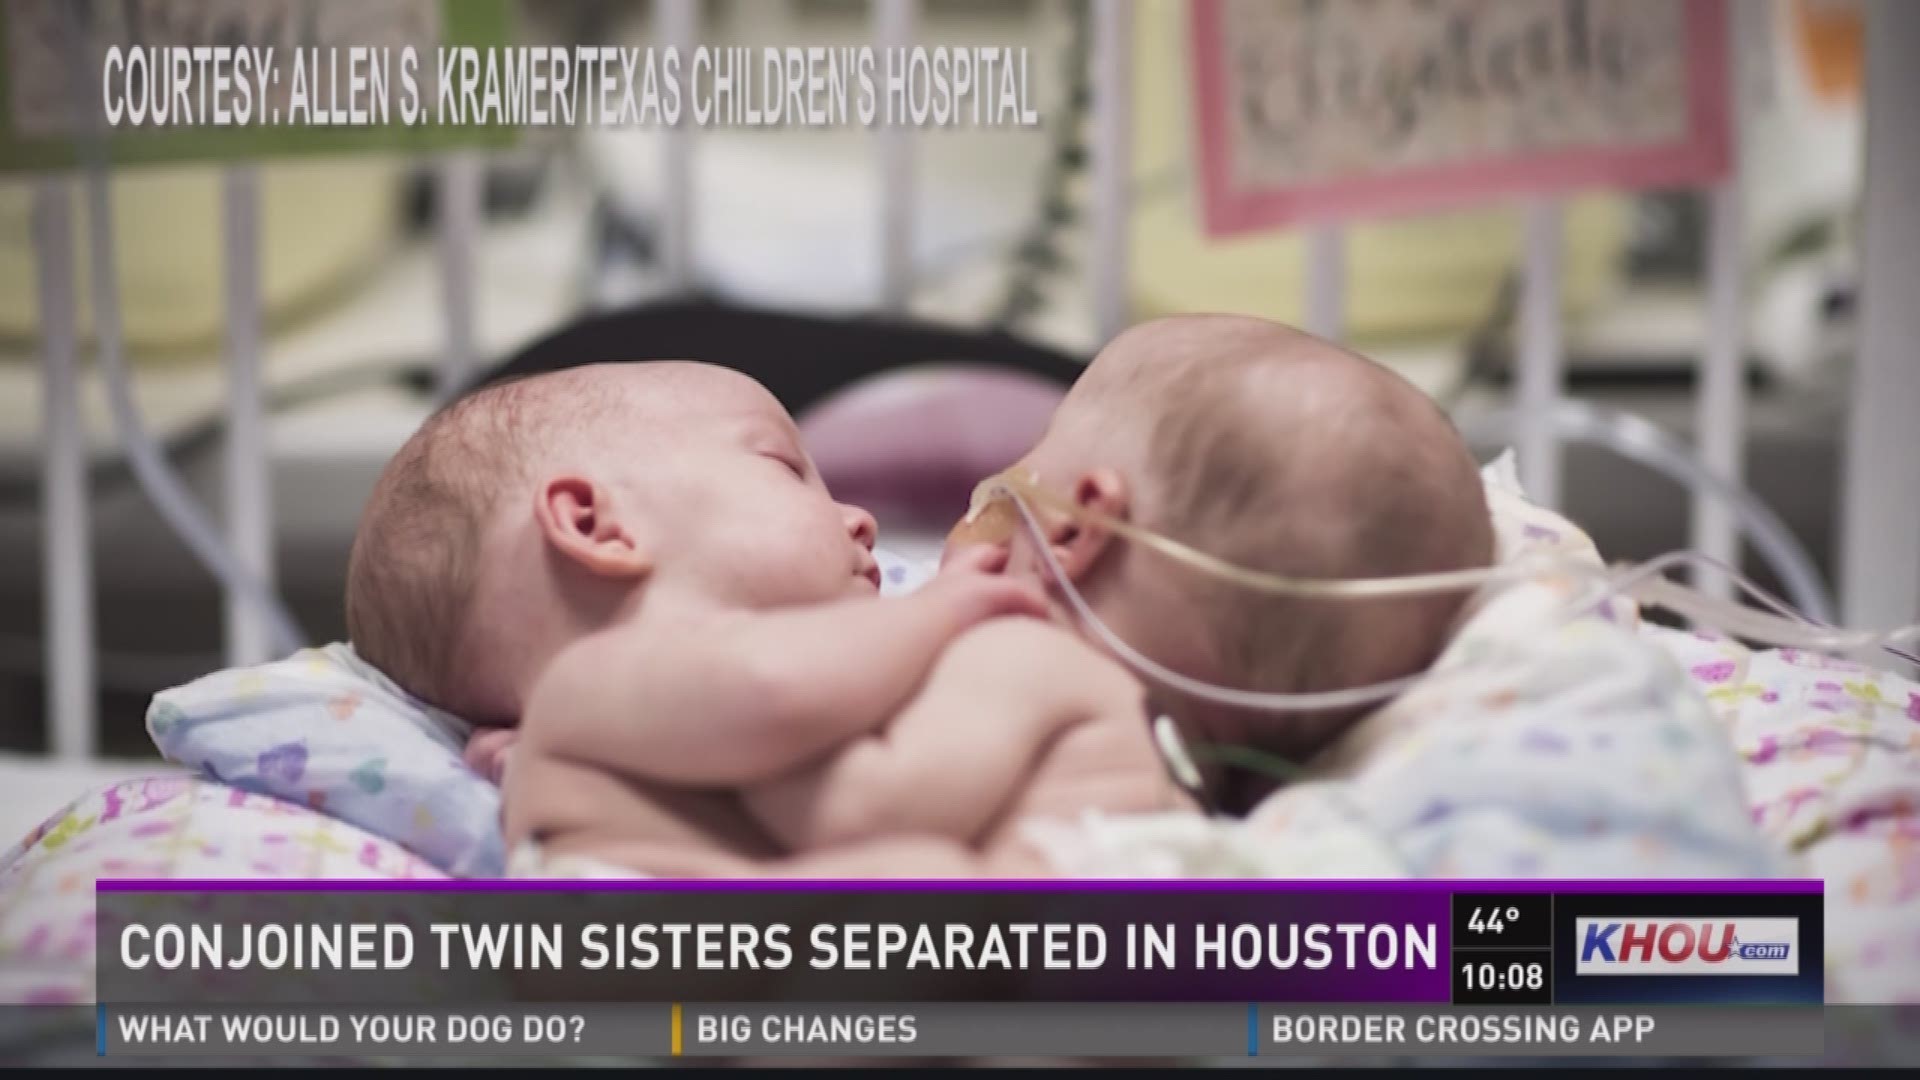 Conjoined identical twin girls have been successfully separated at Texas Children's Hospital.